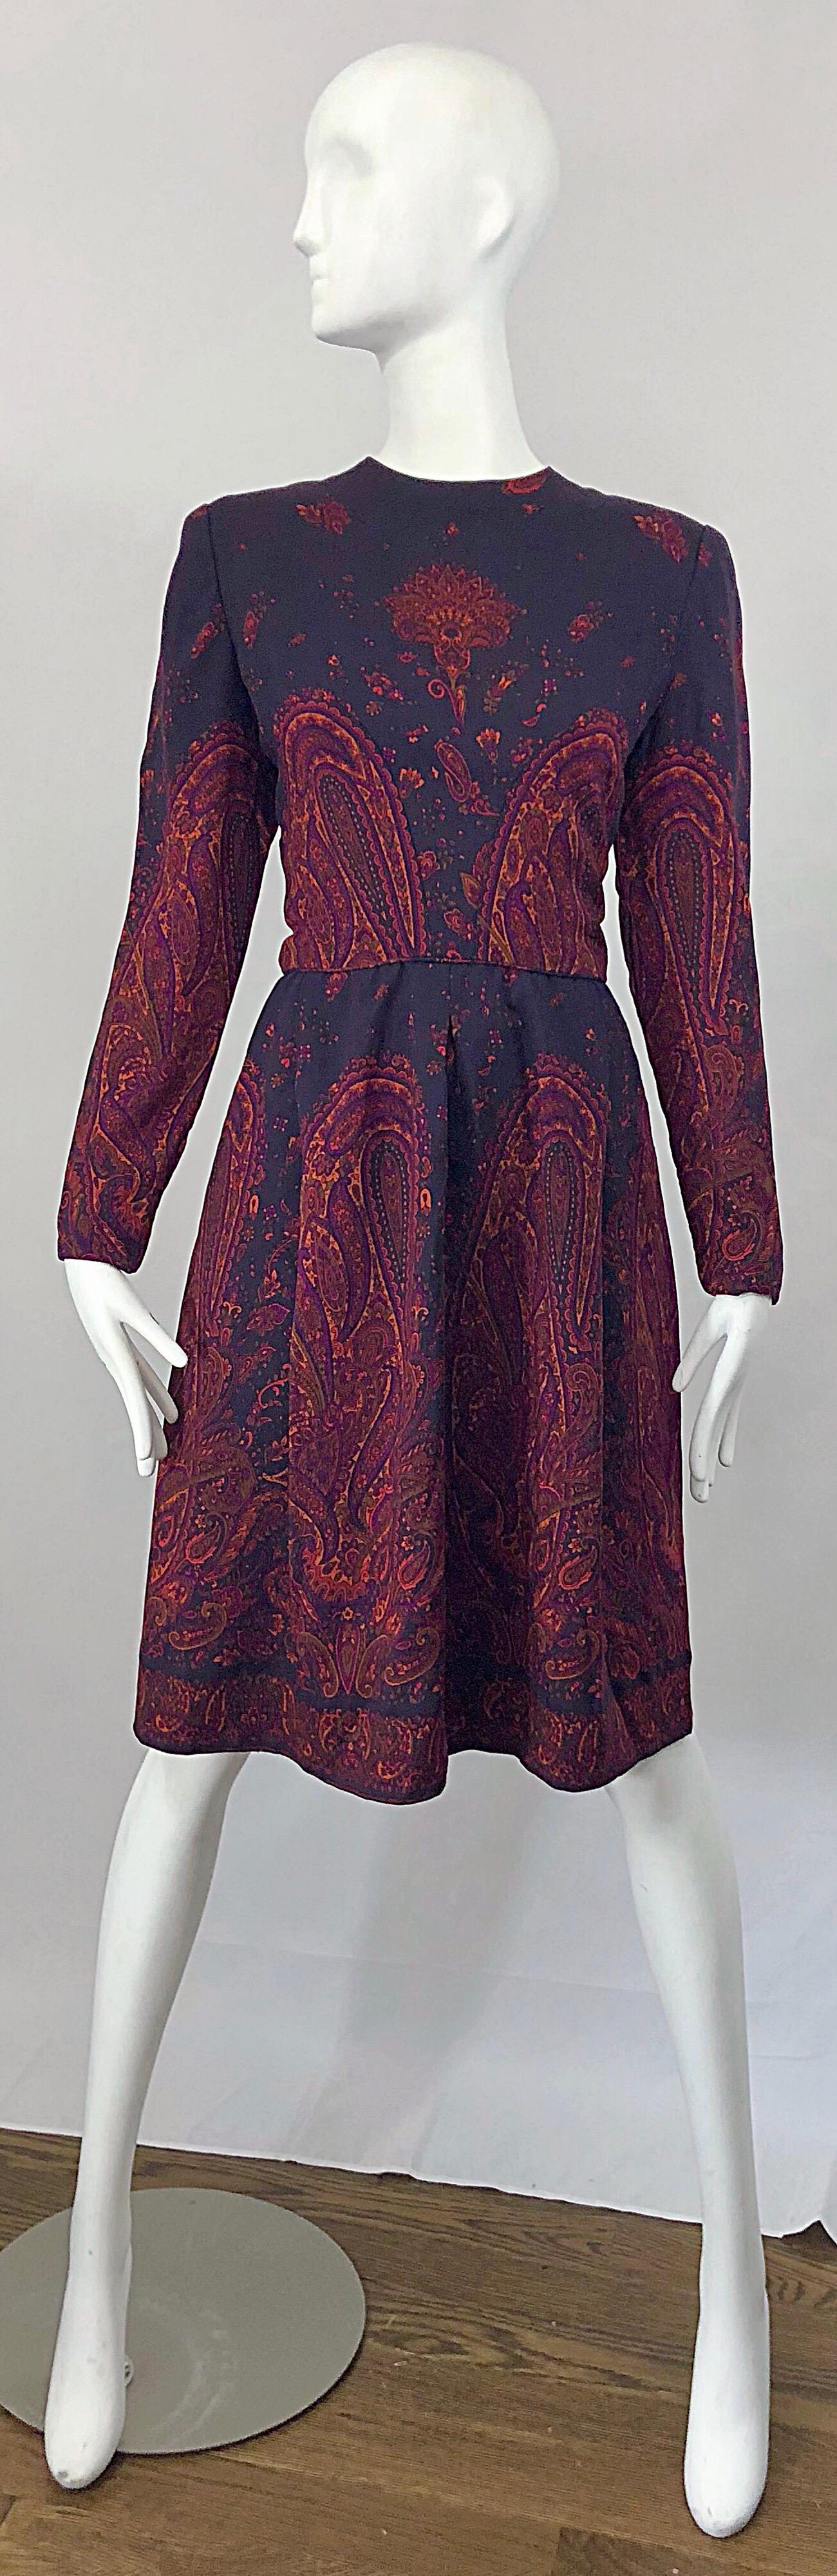 Chic late 1970s / 70s PAULINE TRIGERE dark purple lightweight wool challis long sleeve dress! Features flattering symmetrical paisley prints in burnt orange, purple and red strategically placed throughout. Couture quality, with the majority of the